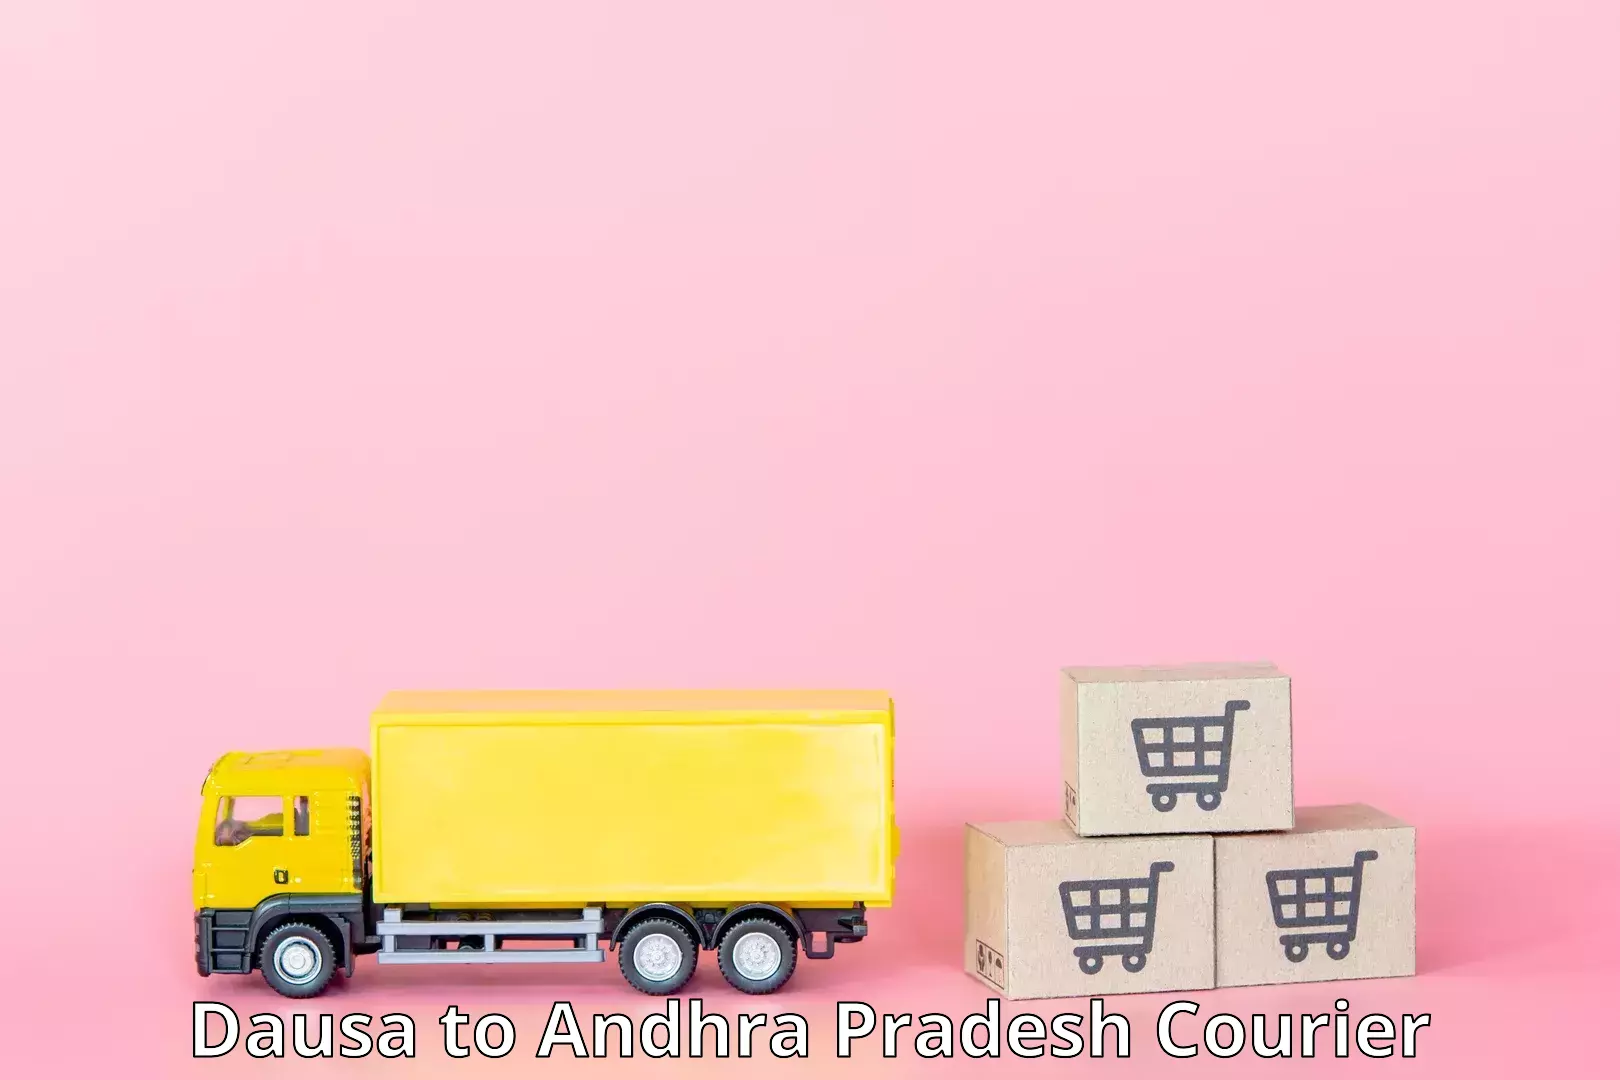 State-of-the-art courier technology Dausa to Sirvella